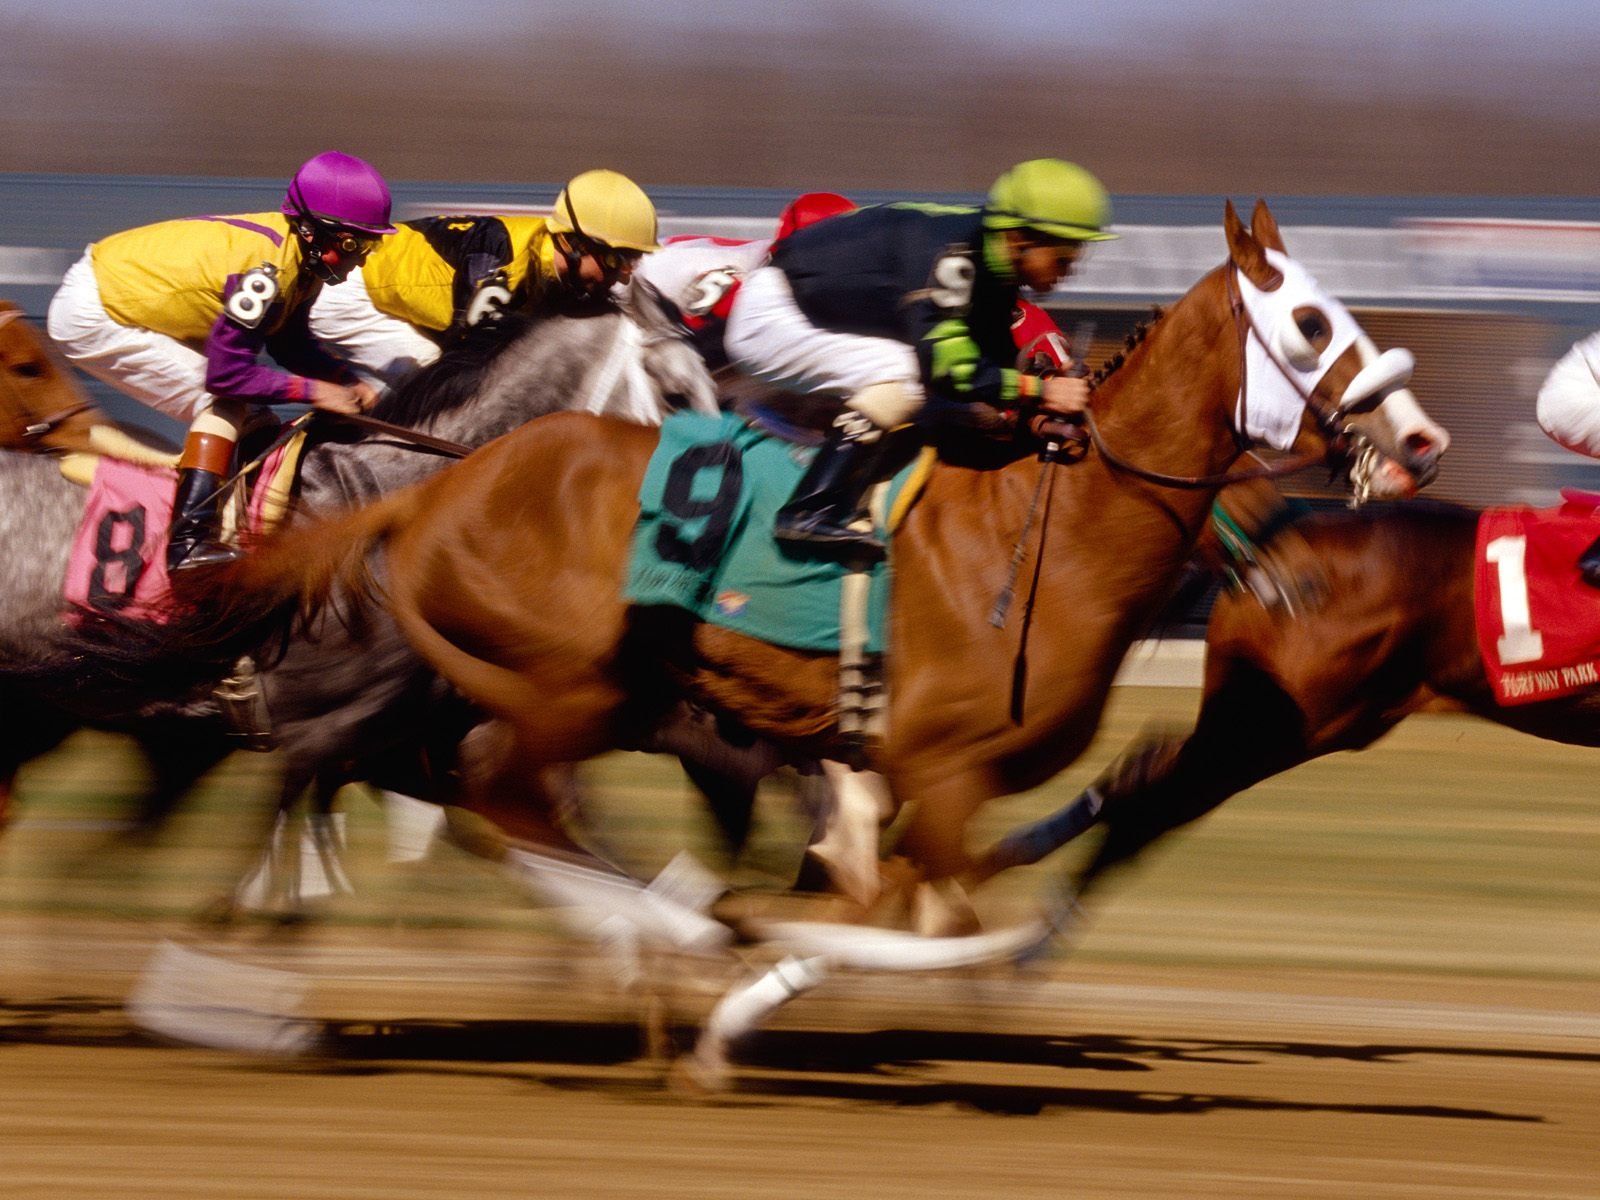  residents to bet on horse races by phone. Image: AZRacing.gov